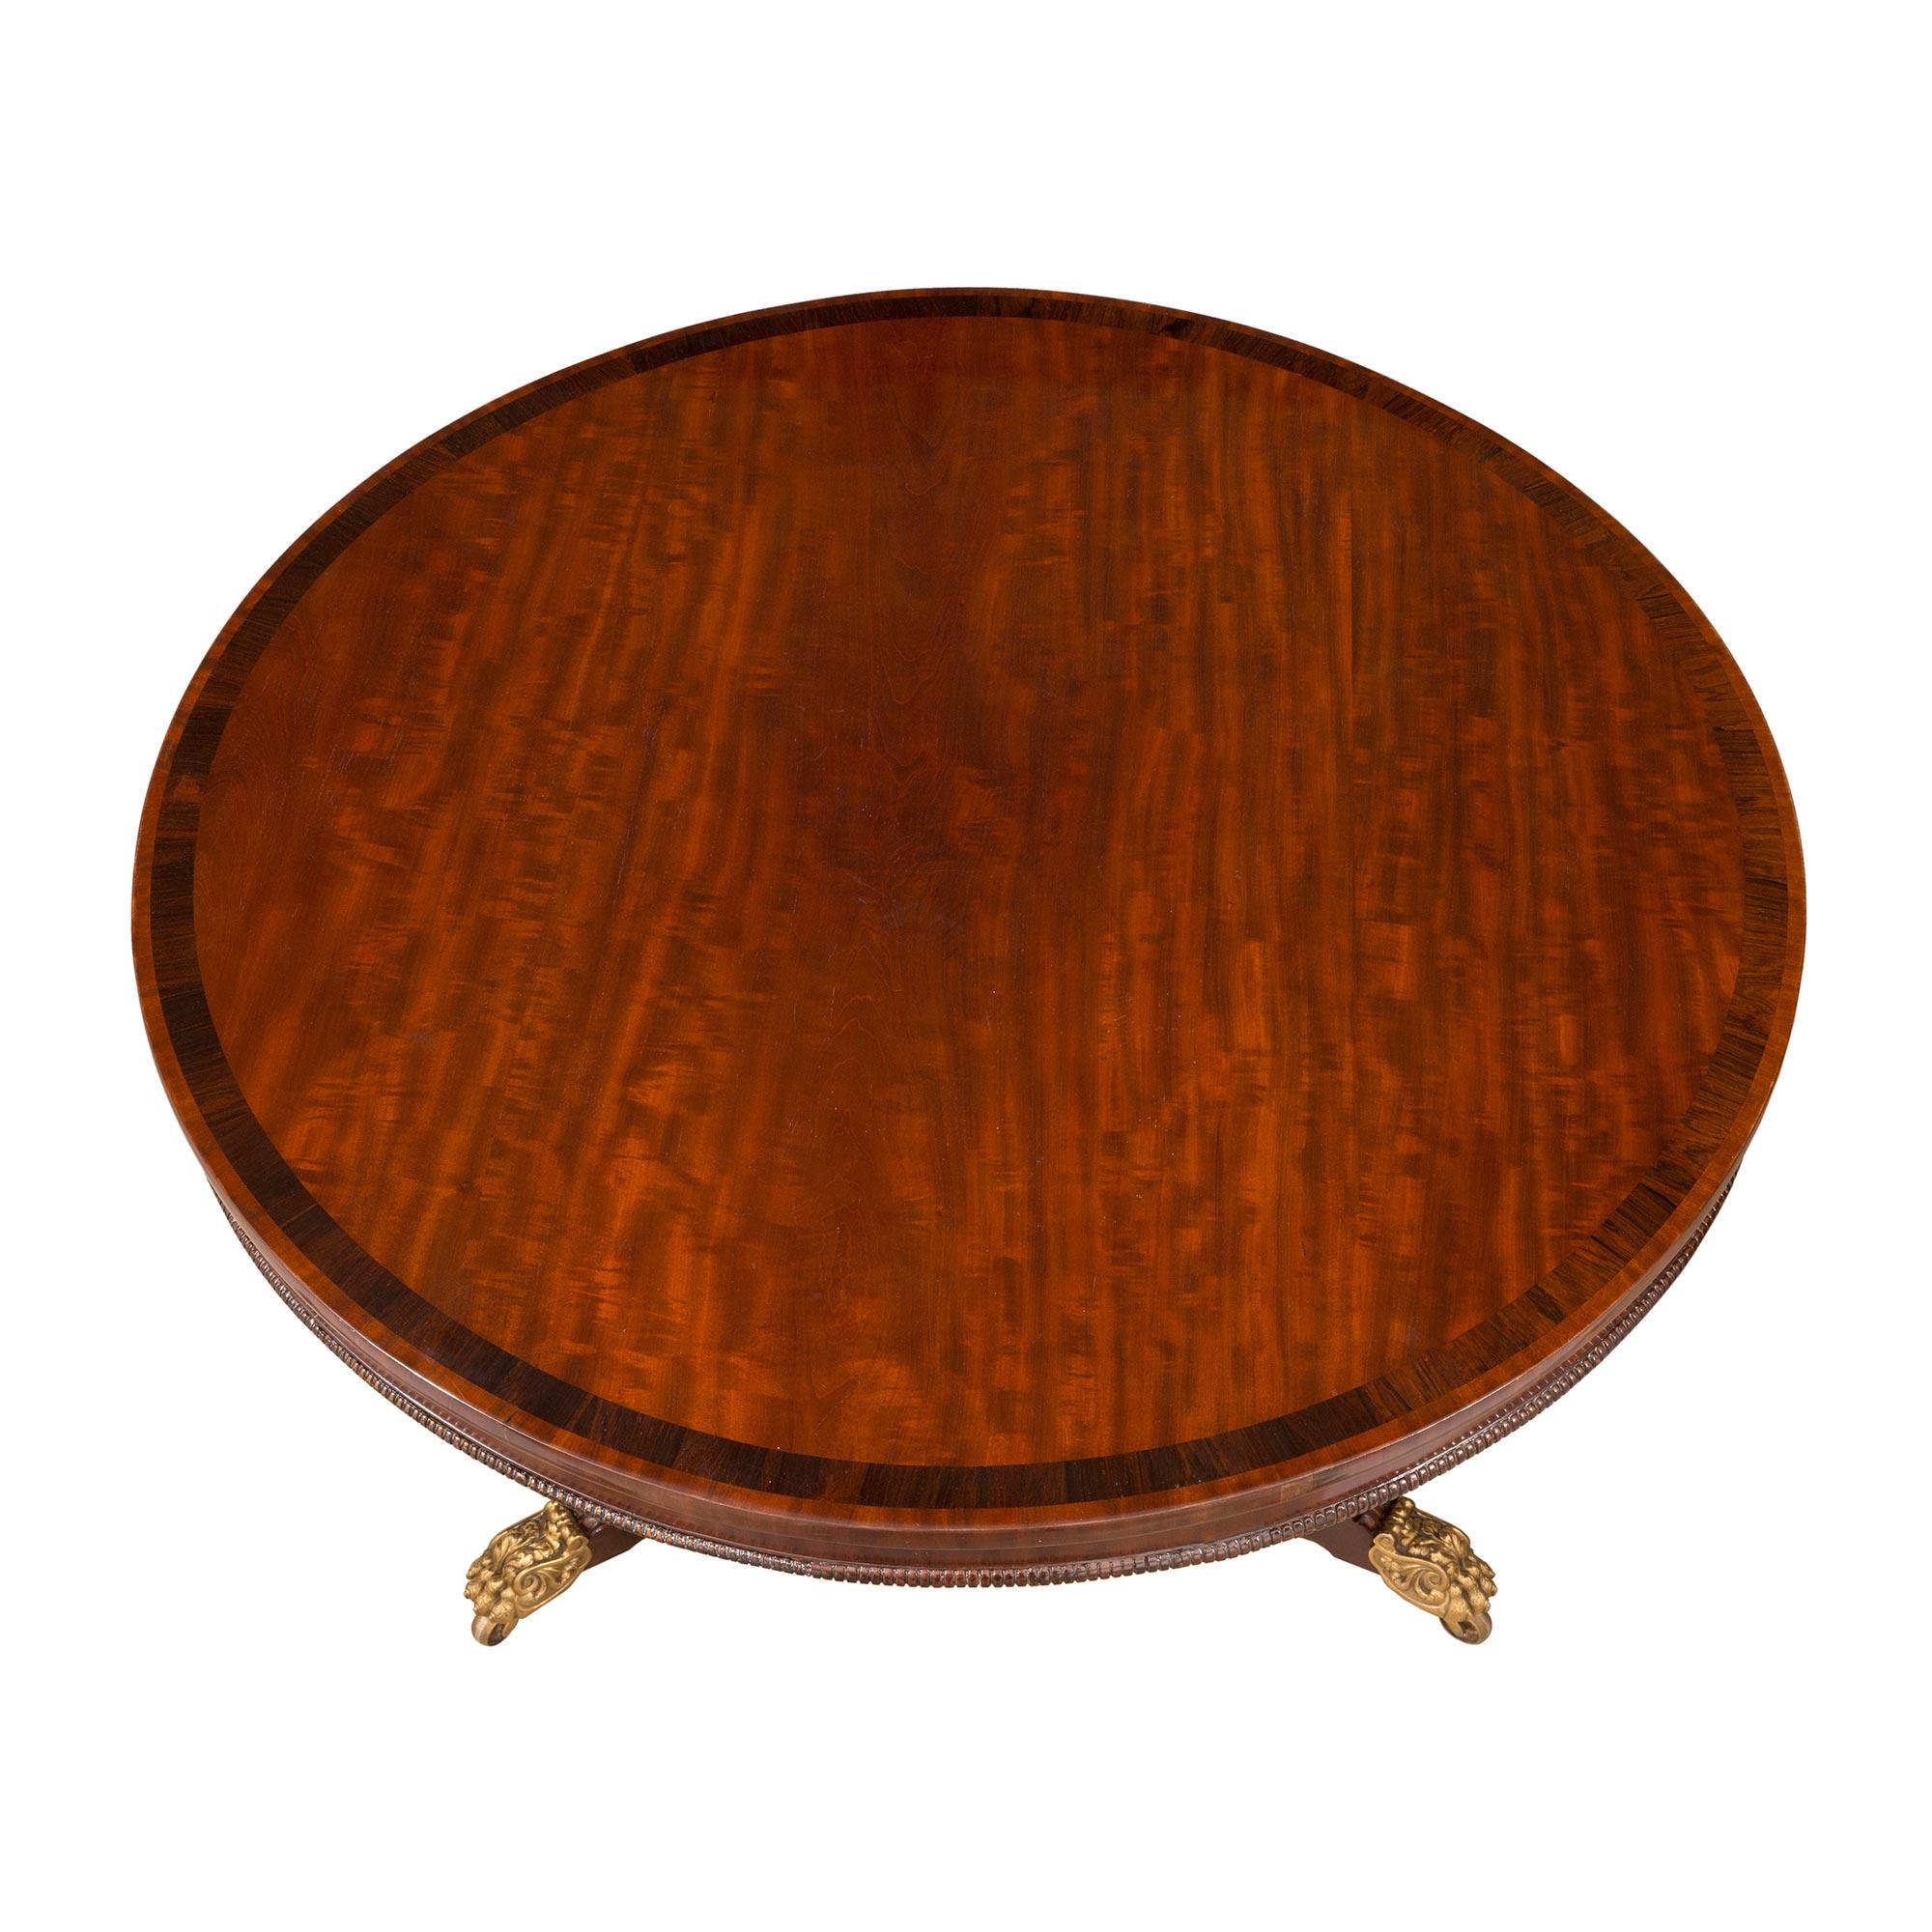 A handsome and extremely elegant English 19th century Regency st. mahogany, kingwood and ormolu center table. The table is raised by a triangular shaped base with concave sides and richly chased ormolu paw feet with their original casters. The